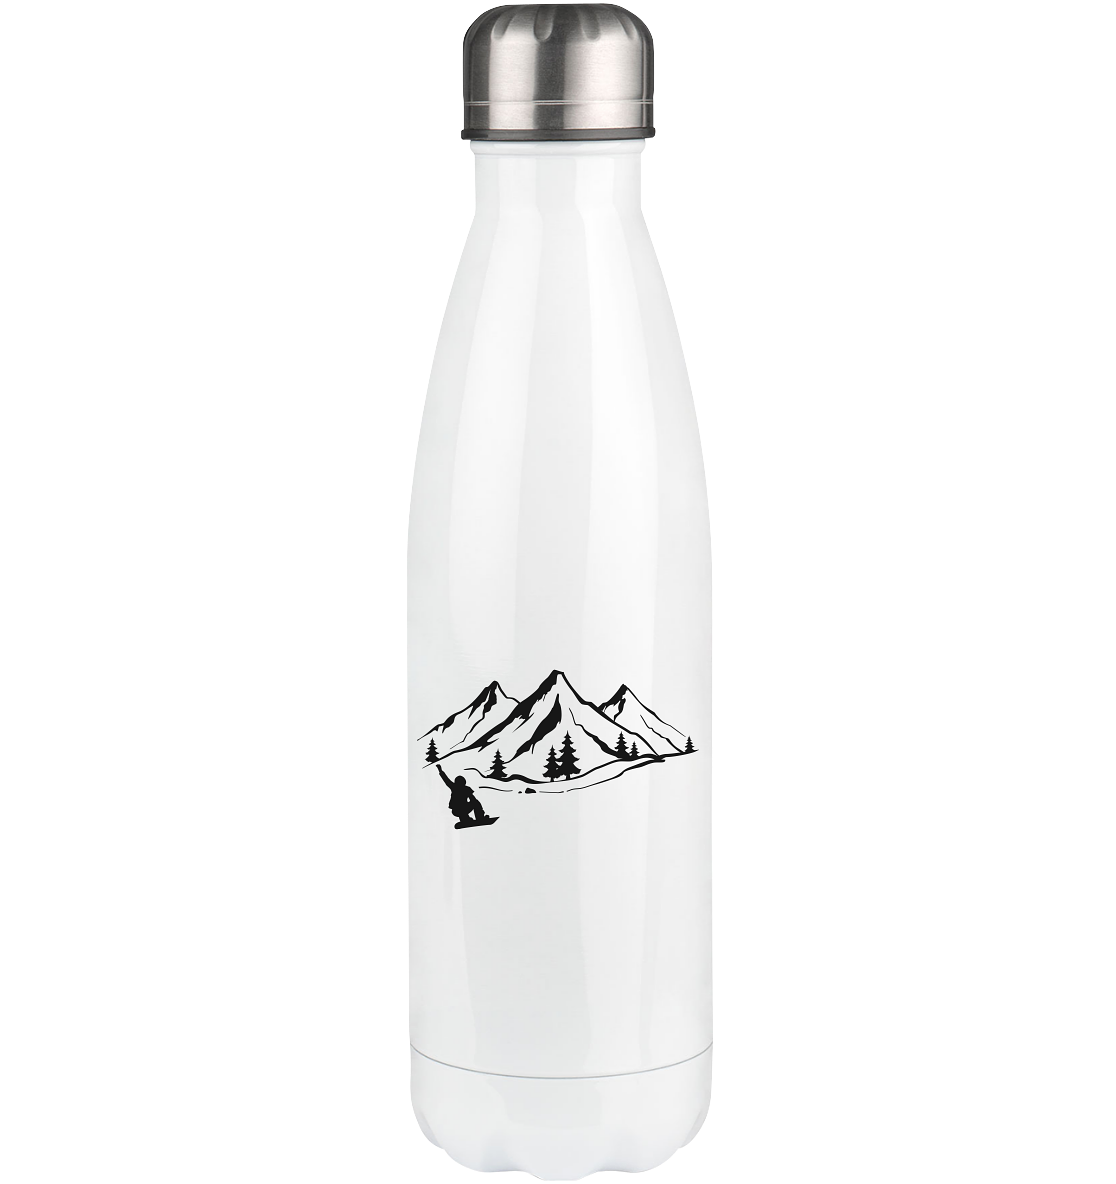 Mountain 1 and Snowboarding - Edelstahl Thermosflasche snowboarden 500ml